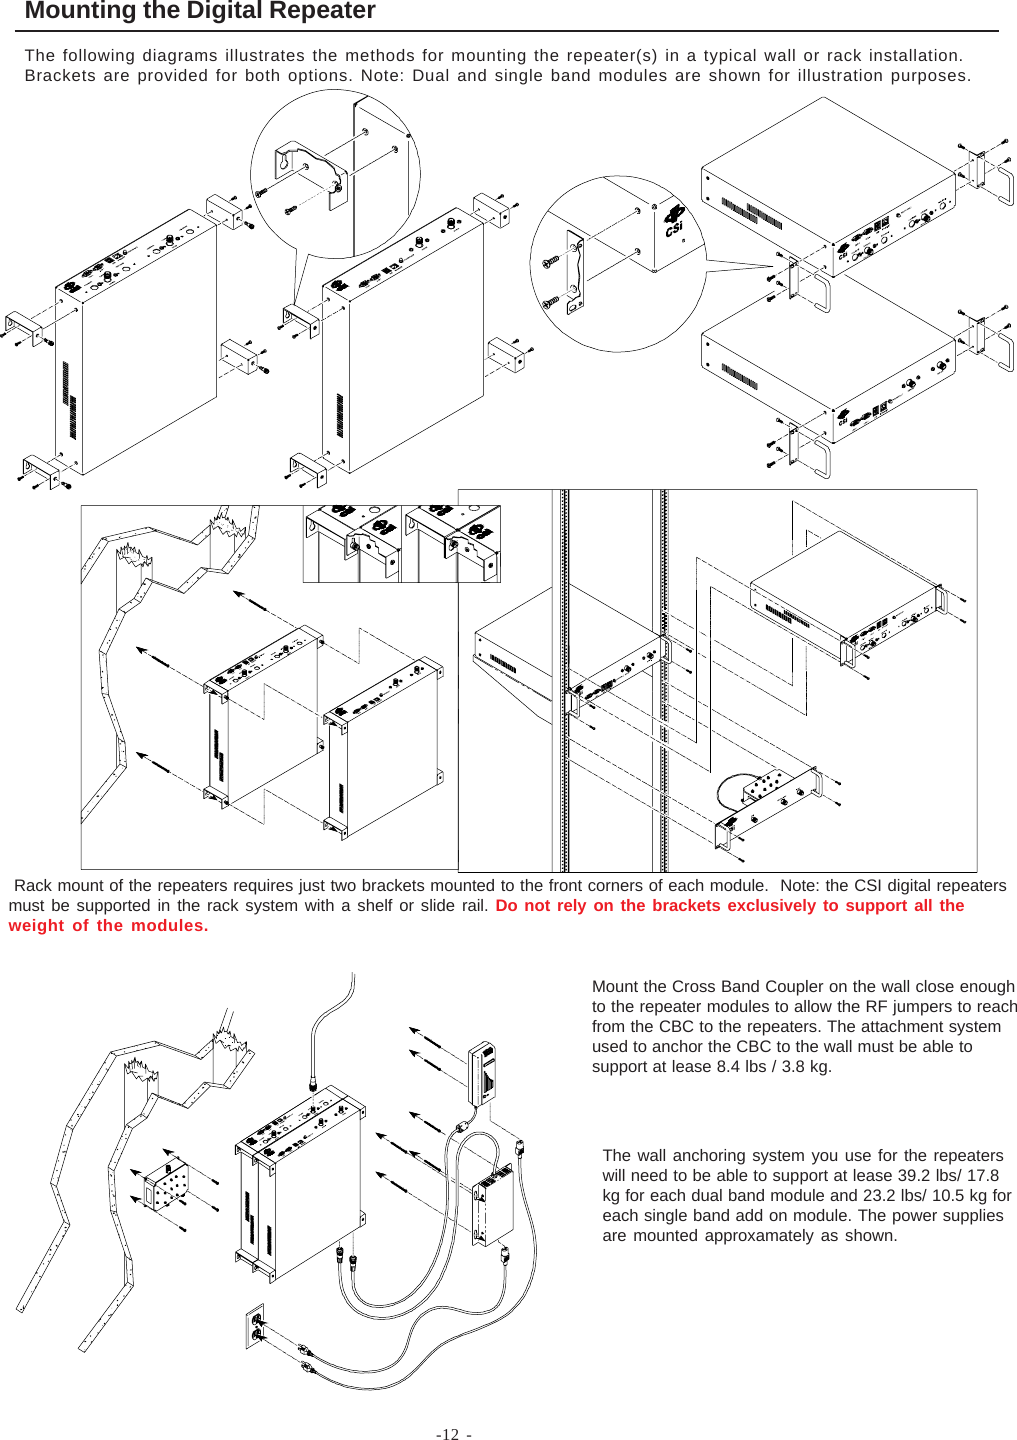 -12 -Mounting the Digital RepeaterThe following diagrams illustrates the methods for mounting the repeater(s) in a typical wall or rack installation.Brackets are provided for both options. Note: Dual and single band modules are shown for illustration purposes. Rack mount of the repeaters requires just two brackets mounted to the front corners of each module.  Note: the CSI digital repeatersmust be supported in the rack system with a shelf or slide rail. Do not rely on the brackets exclusively to support all theweight of the modules.Mount the Cross Band Coupler on the wall close enoughto the repeater modules to allow the RF jumpers to reachfrom the CBC to the repeaters. The attachment systemused to anchor the CBC to the wall must be able tosupport at lease 8.4 lbs / 3.8 kg.The wall anchoring system you use for the repeaterswill need to be able to support at lease 39.2 lbs/ 17.8kg for each dual band module and 23.2 lbs/ 10.5 kg foreach single band add on module. The power suppliesare mounted approxamately as shown.